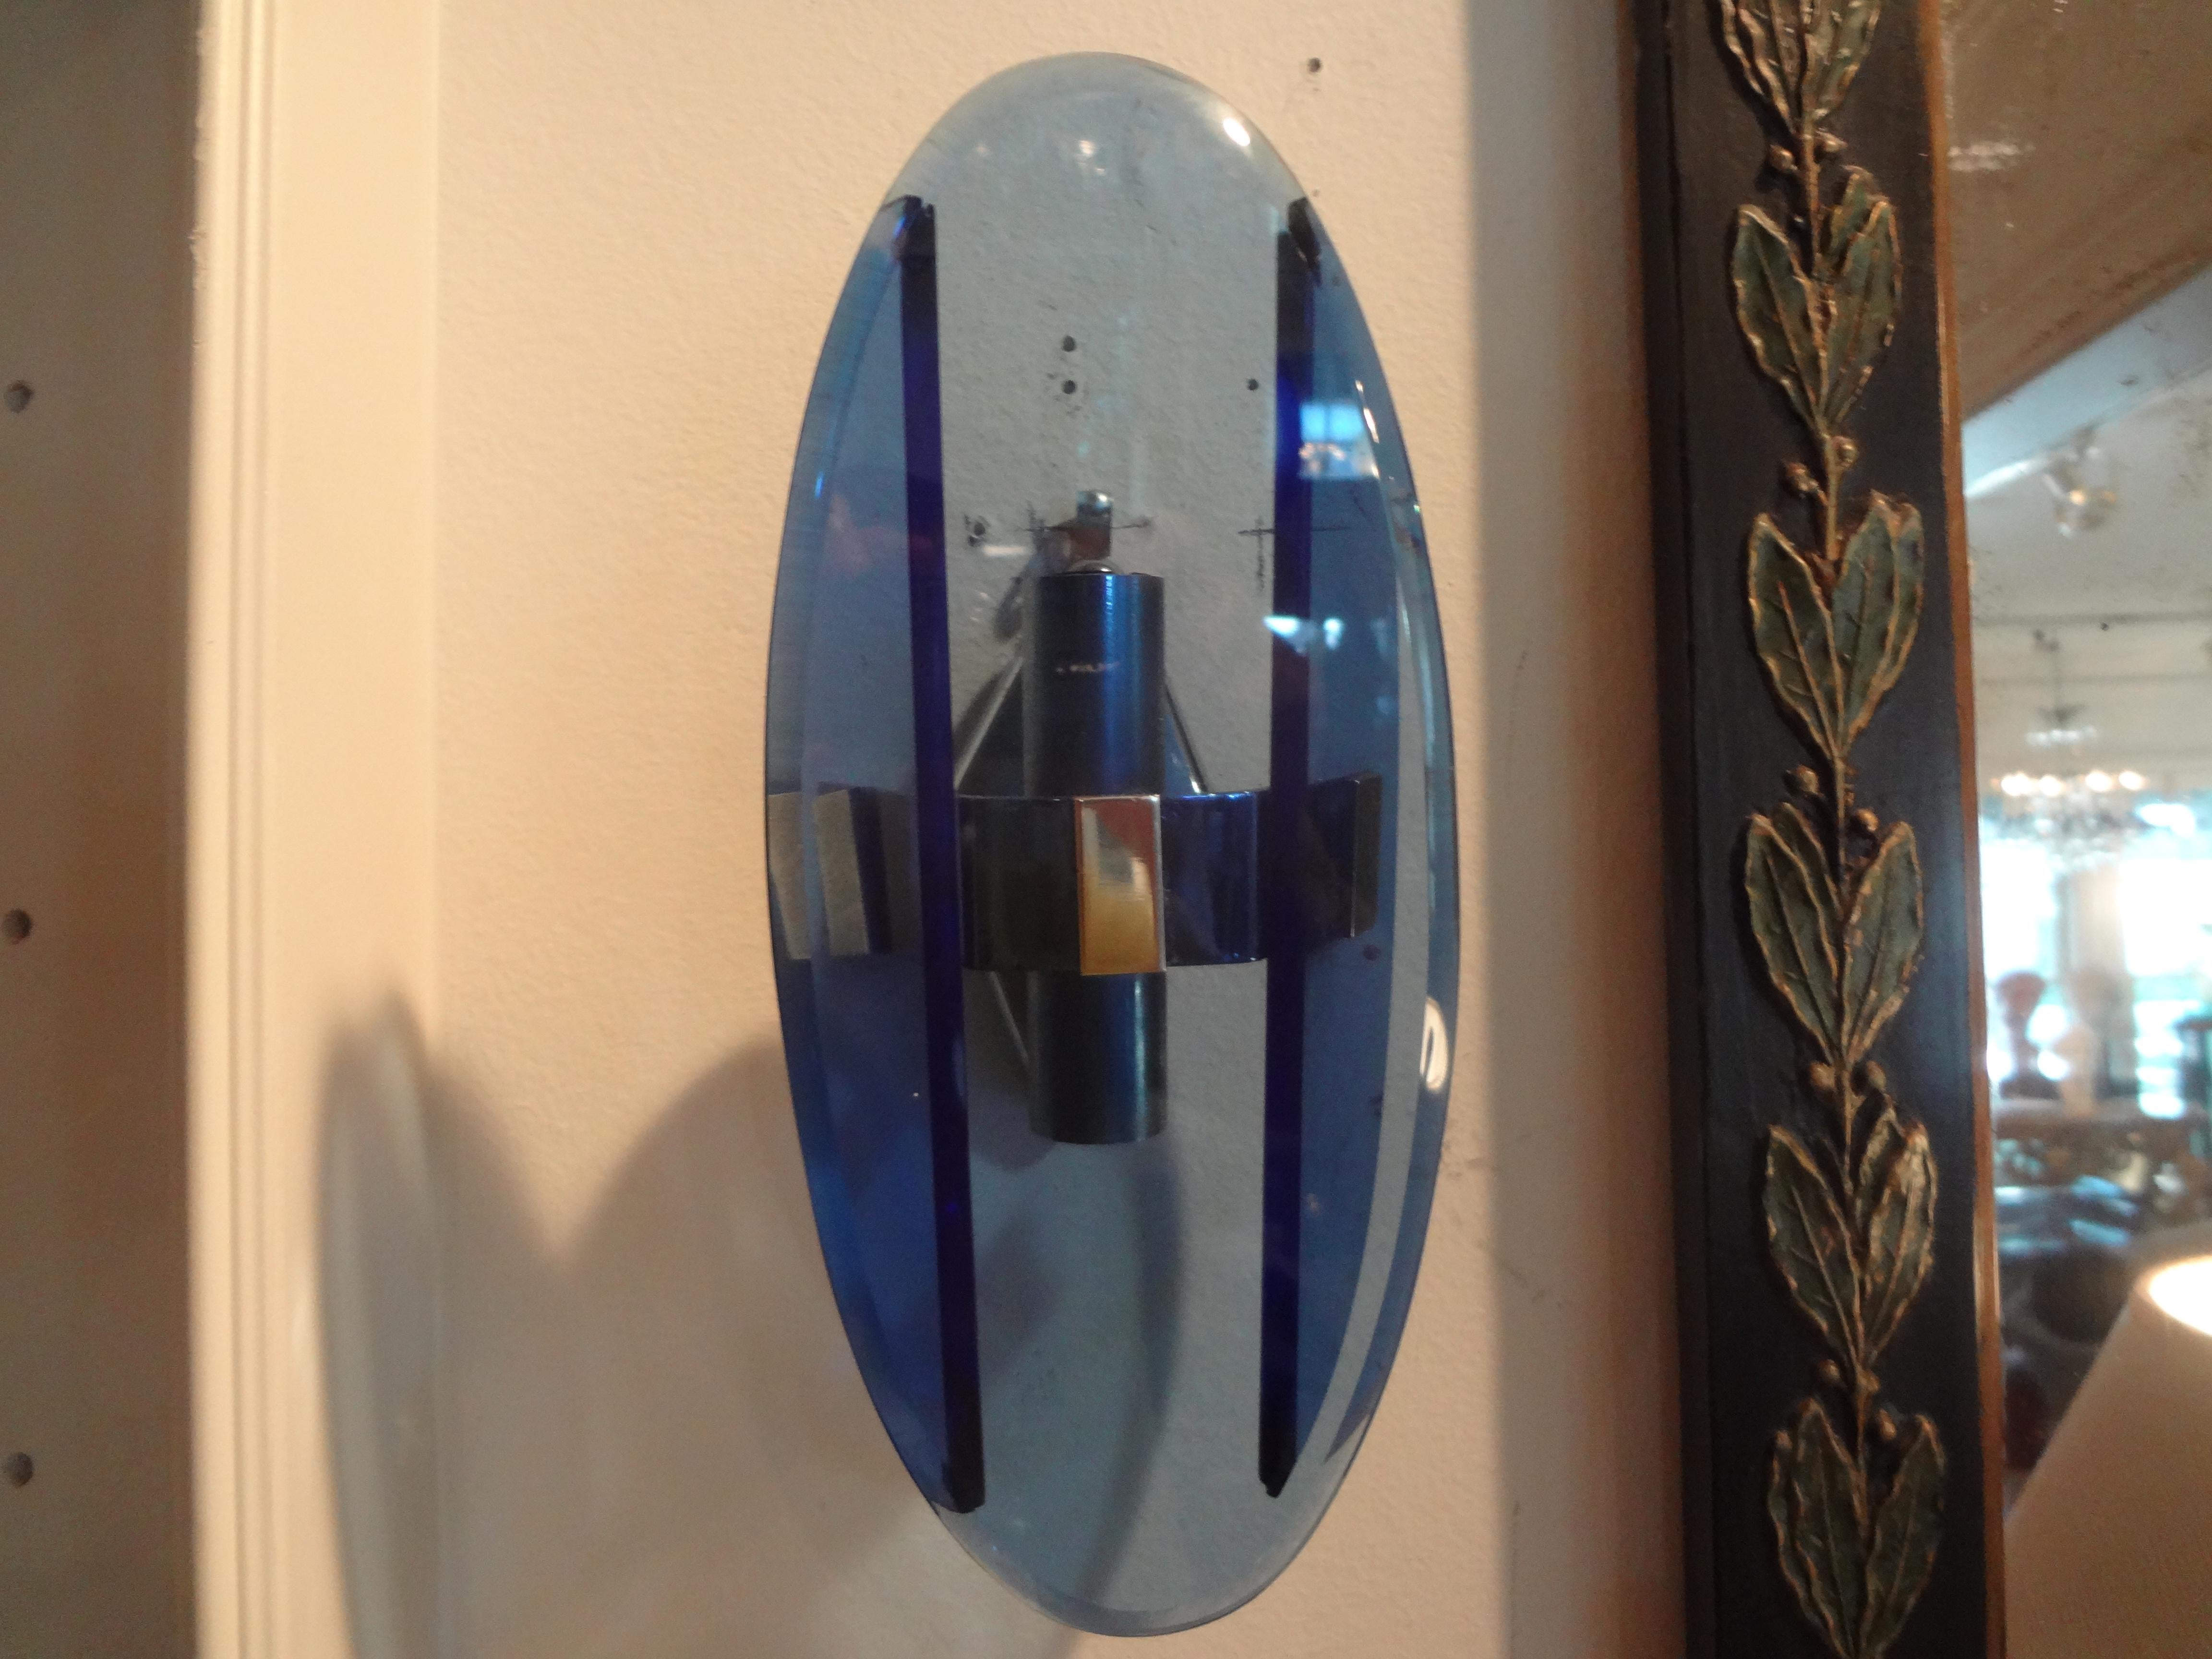 Pair of Italian Fontana Arte style blue glass sconces.
Great pair of Italian oval blue glass wall sconces inspired by the work of Fontana Arte. These chic blue glass sconces (possibly Murano glass sconces) have chromed metal frames and have been